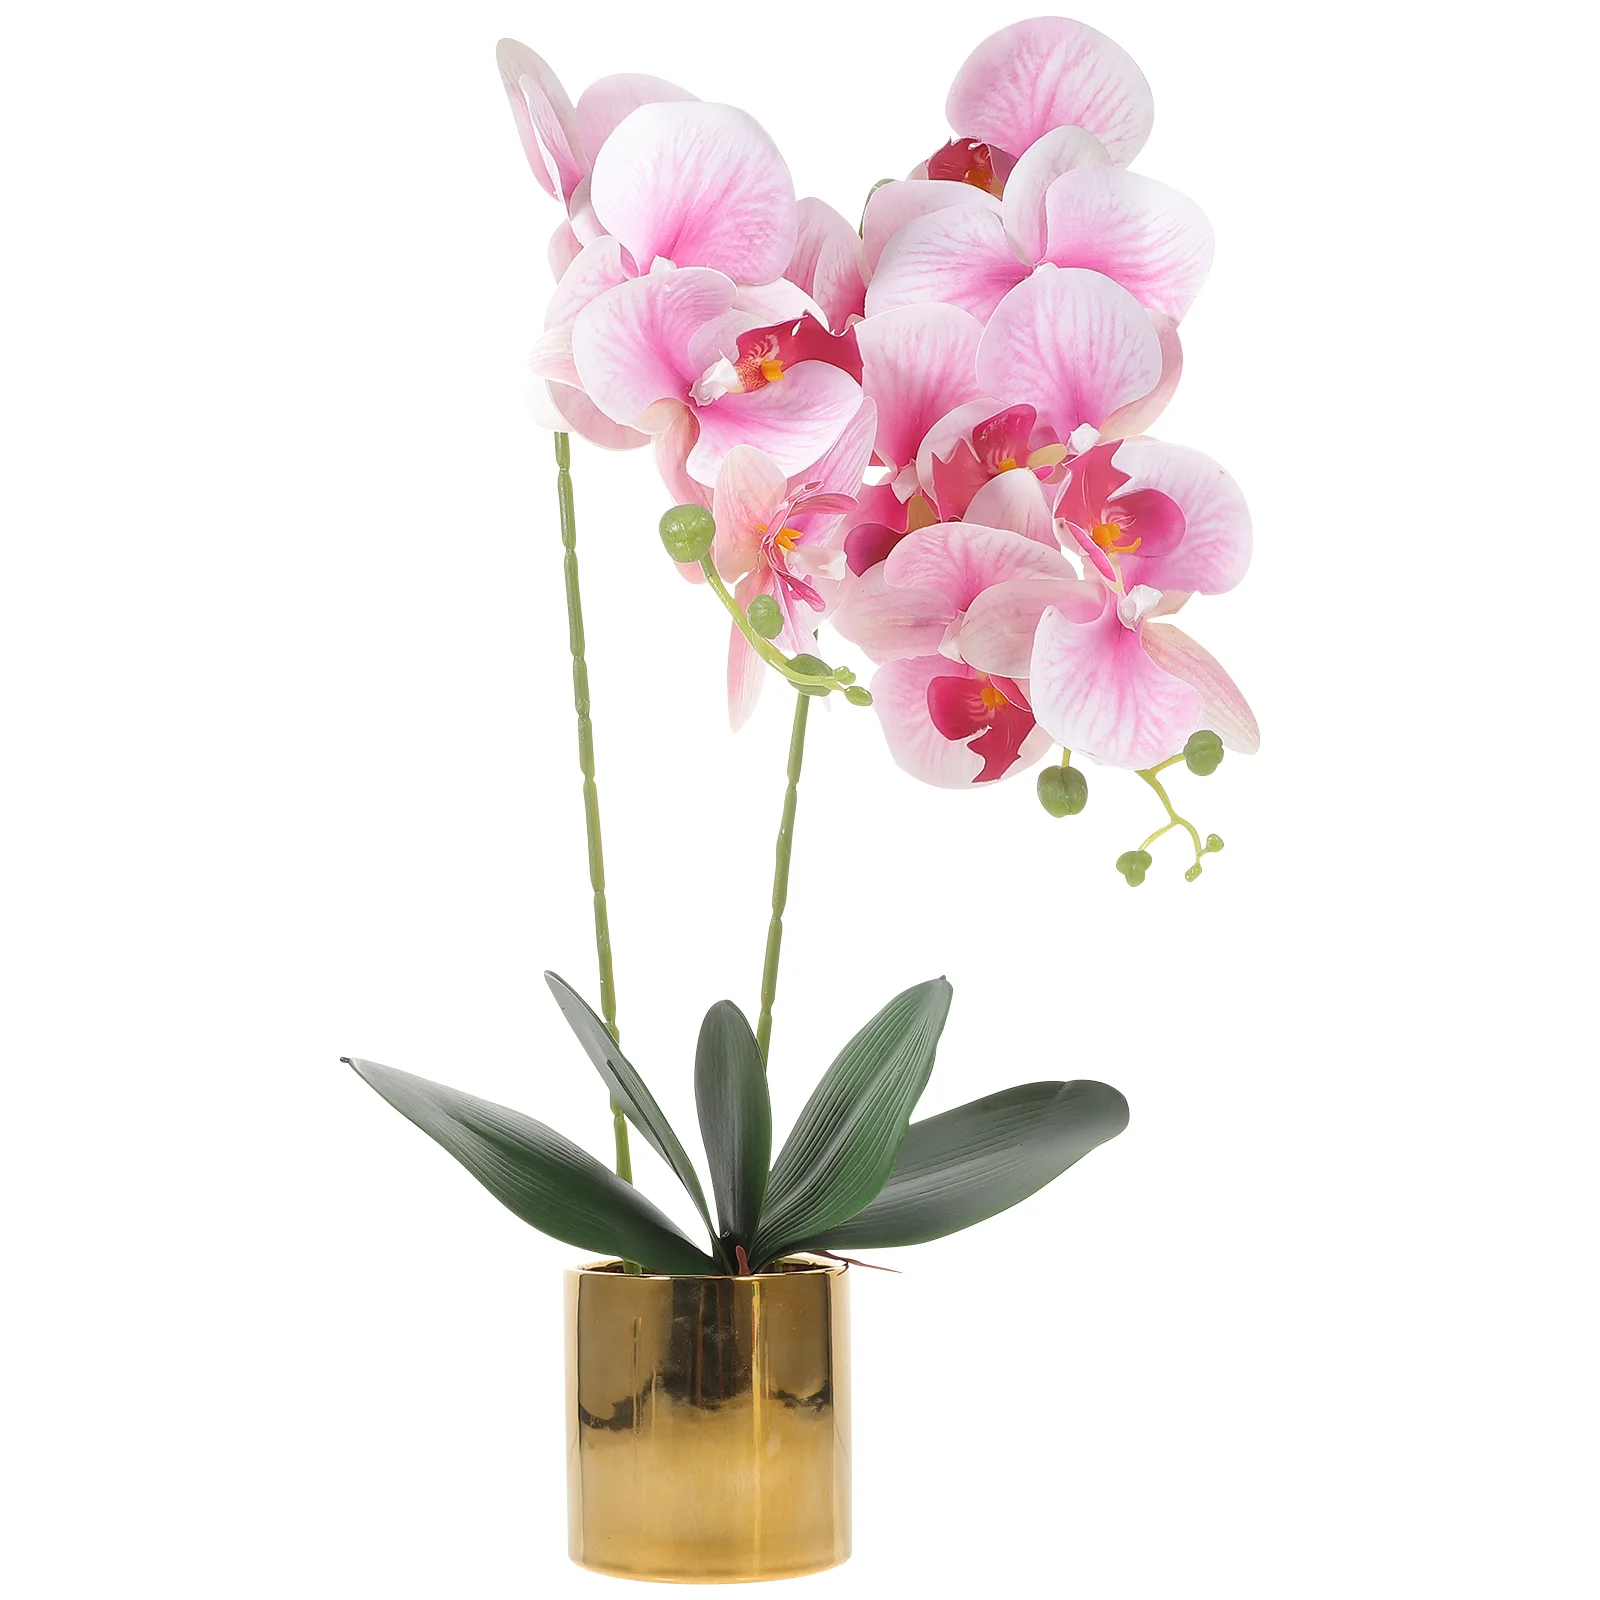 

Orchid Artificial Flower Artificial Orchid Flowers Phalaenopsis Bonsai Potted Orchid Flowers for Home Office Wedding Party